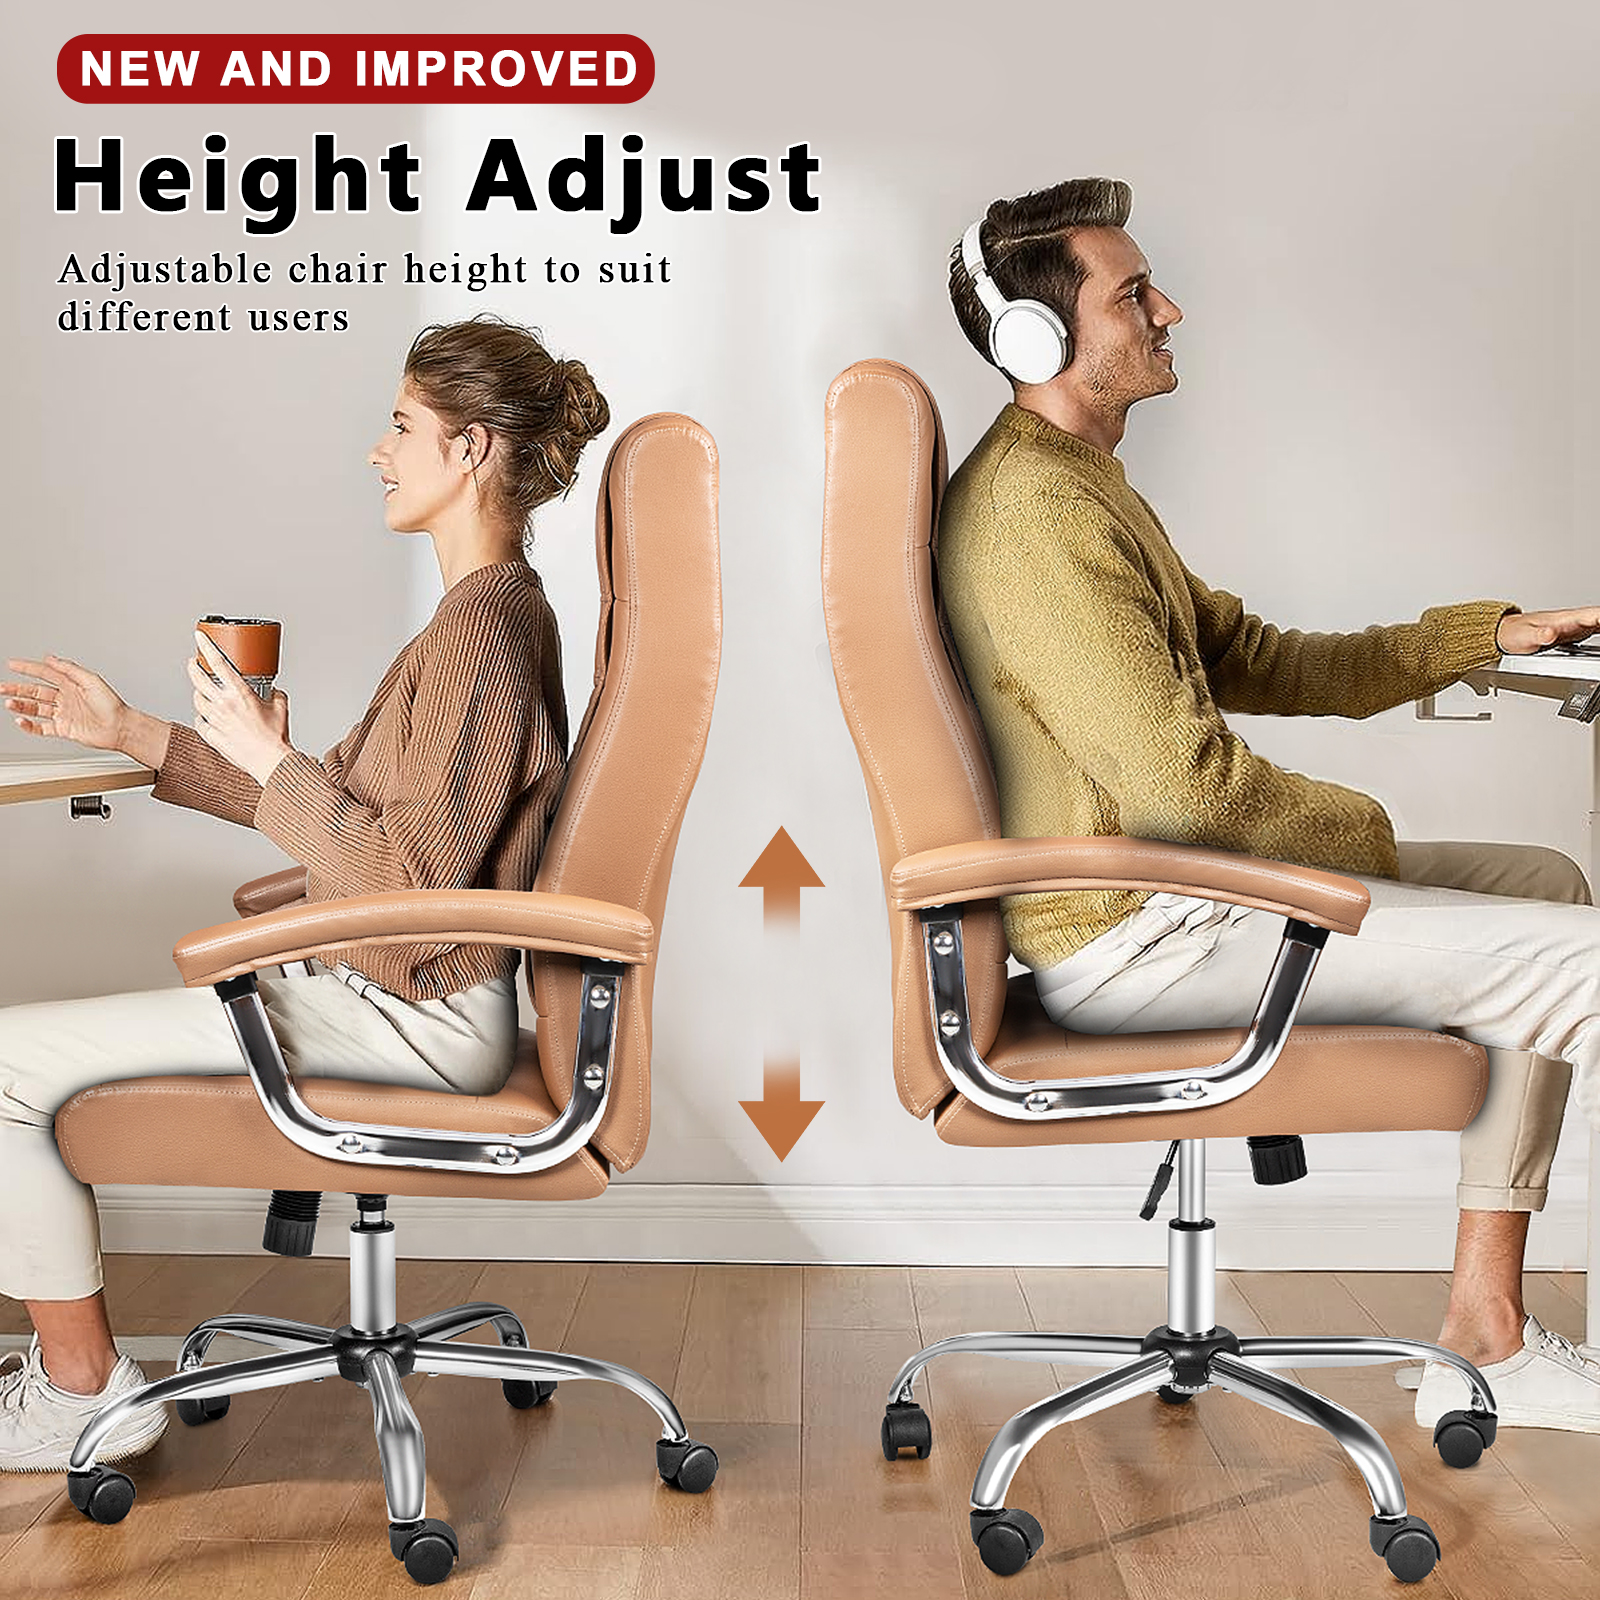 Waleaf Office Chair with Spring Cushion,400LBS High Back Computer Chair with Padded Armrest, Khaki - image 3 of 7